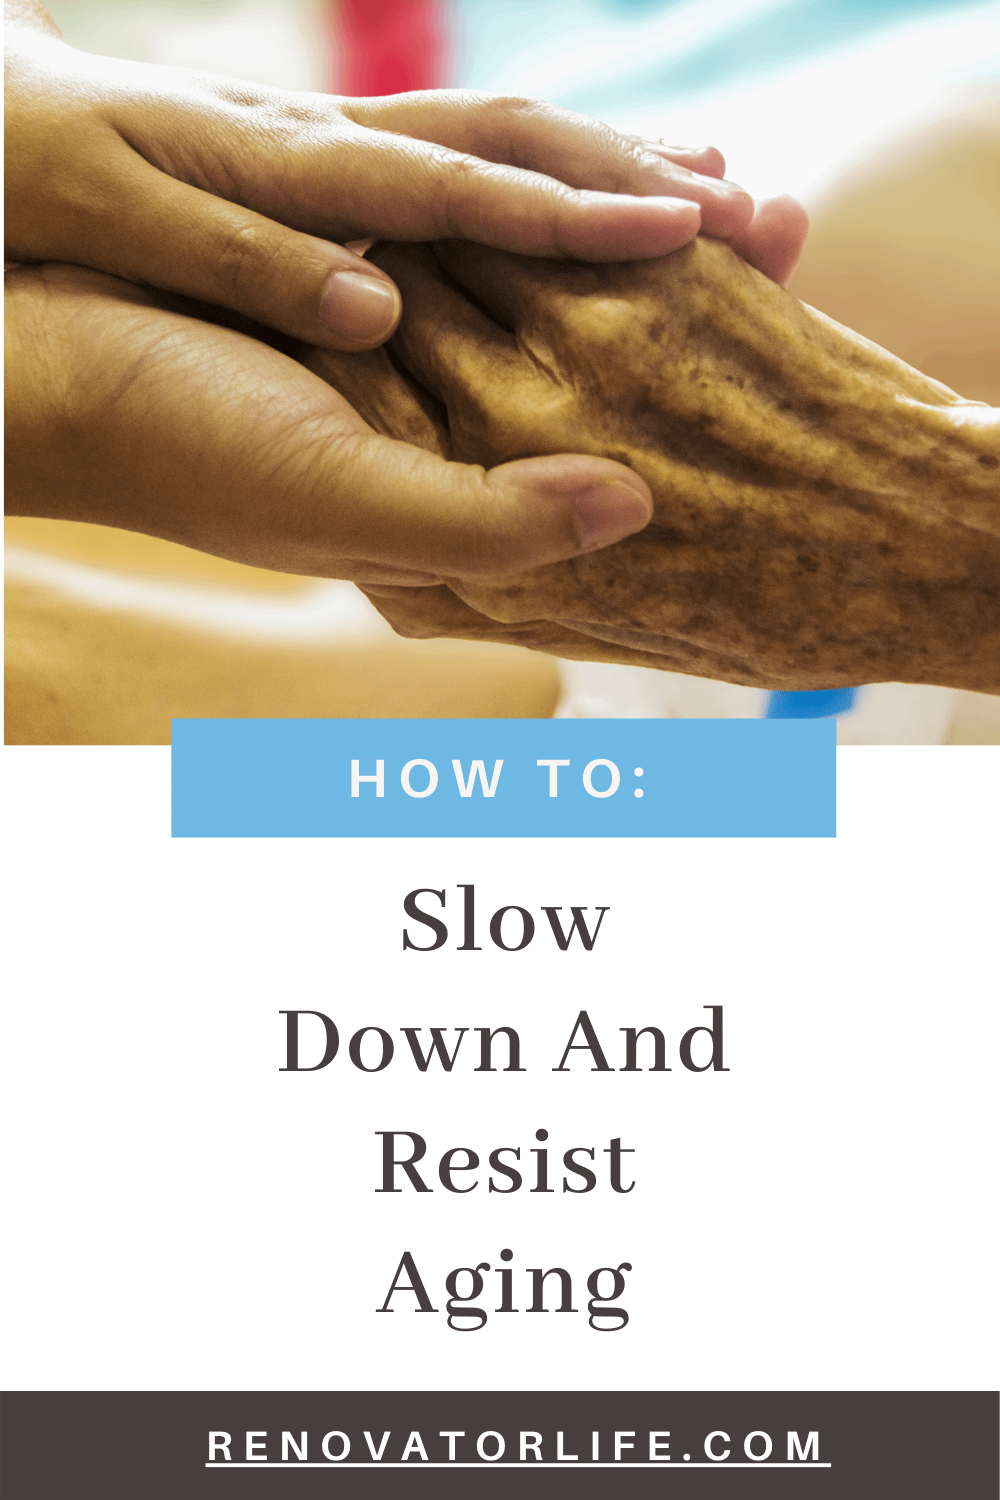 Slow down and resist aging